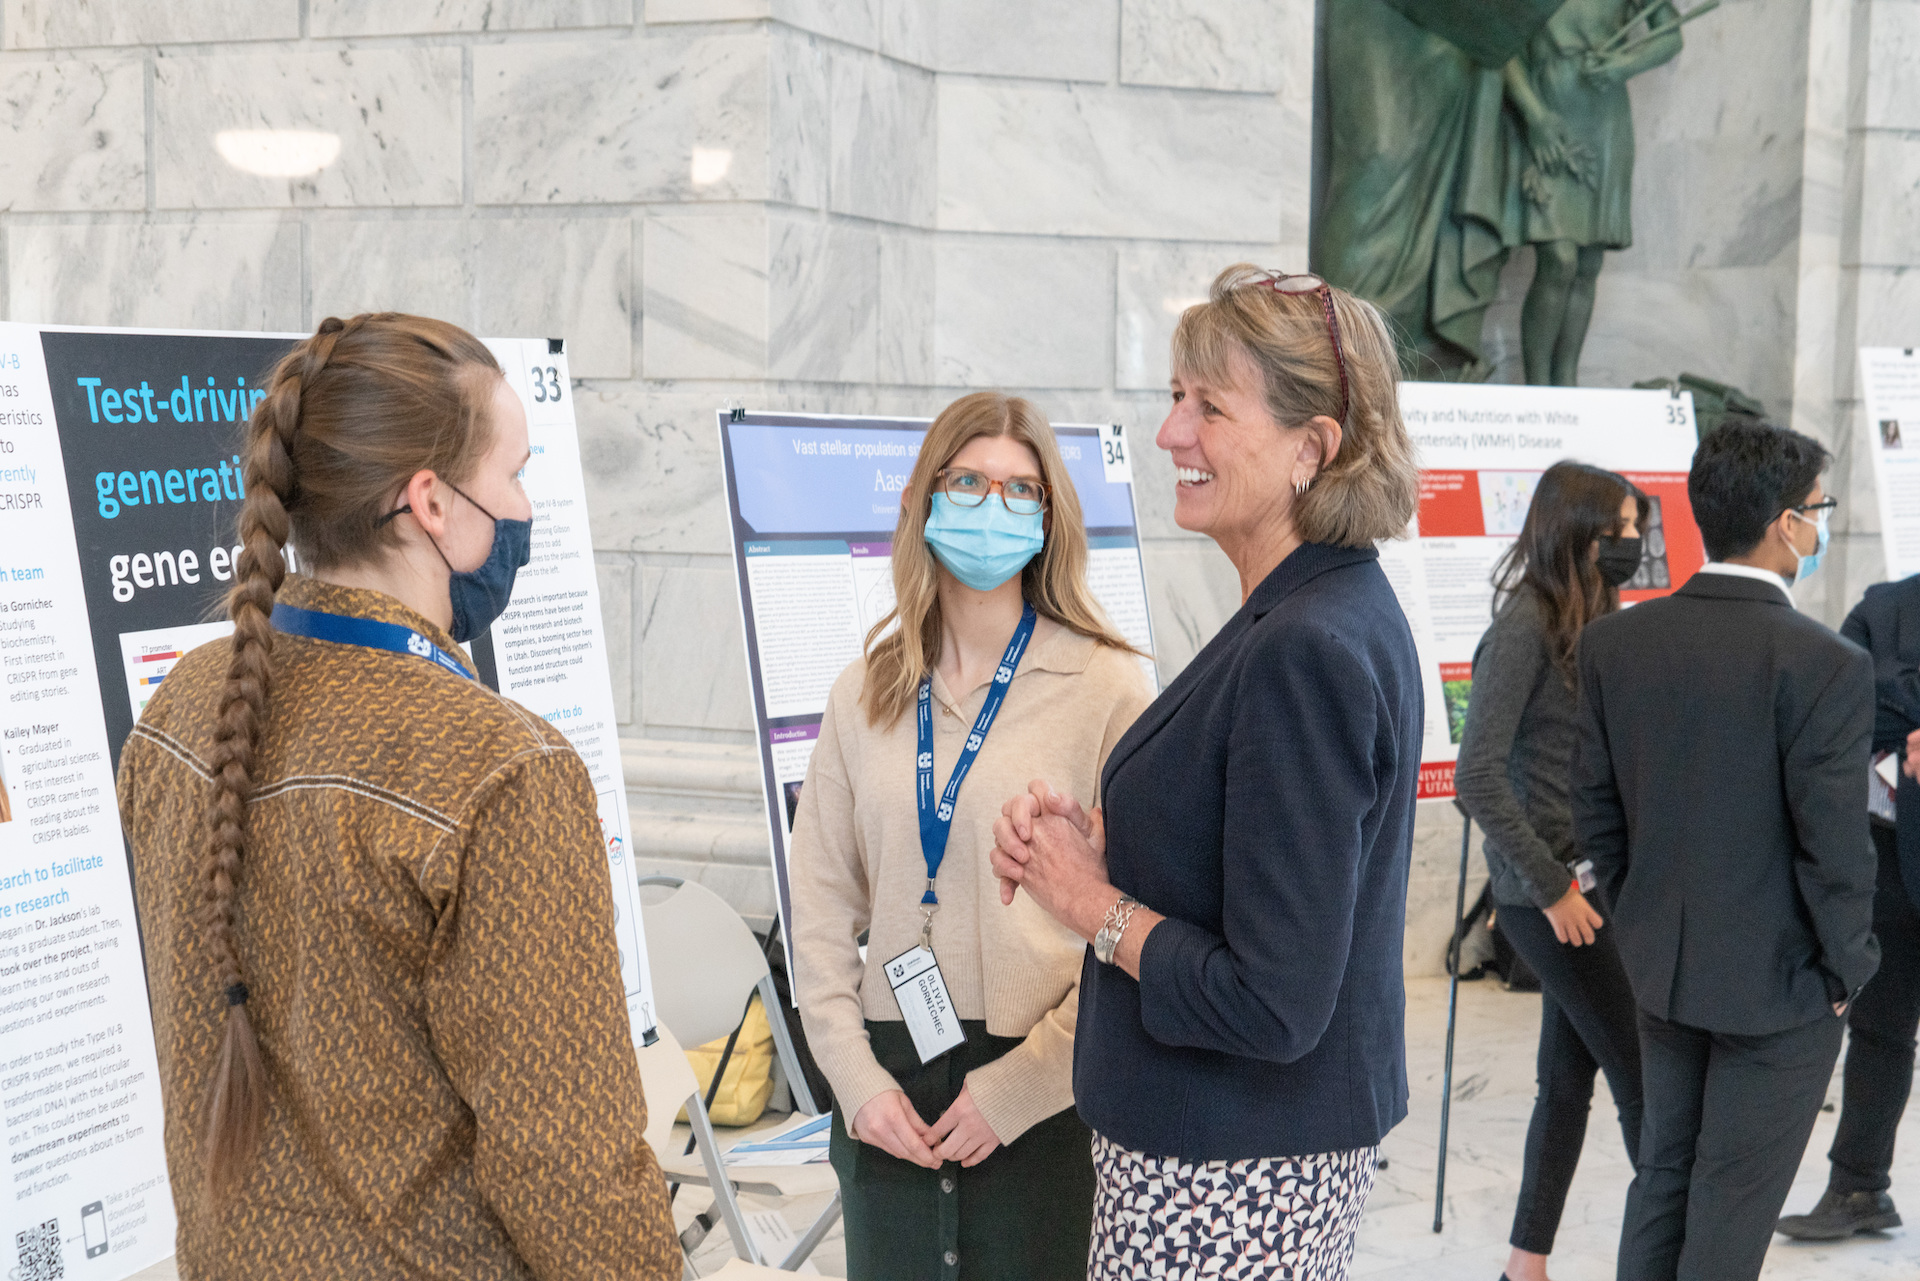 President Noelle Cockett meeting with student presenters Kailey Welch and Olivia Gornichec in the Rotunda of the State Capitol during the 2022 Utah Research on Capitol Hill